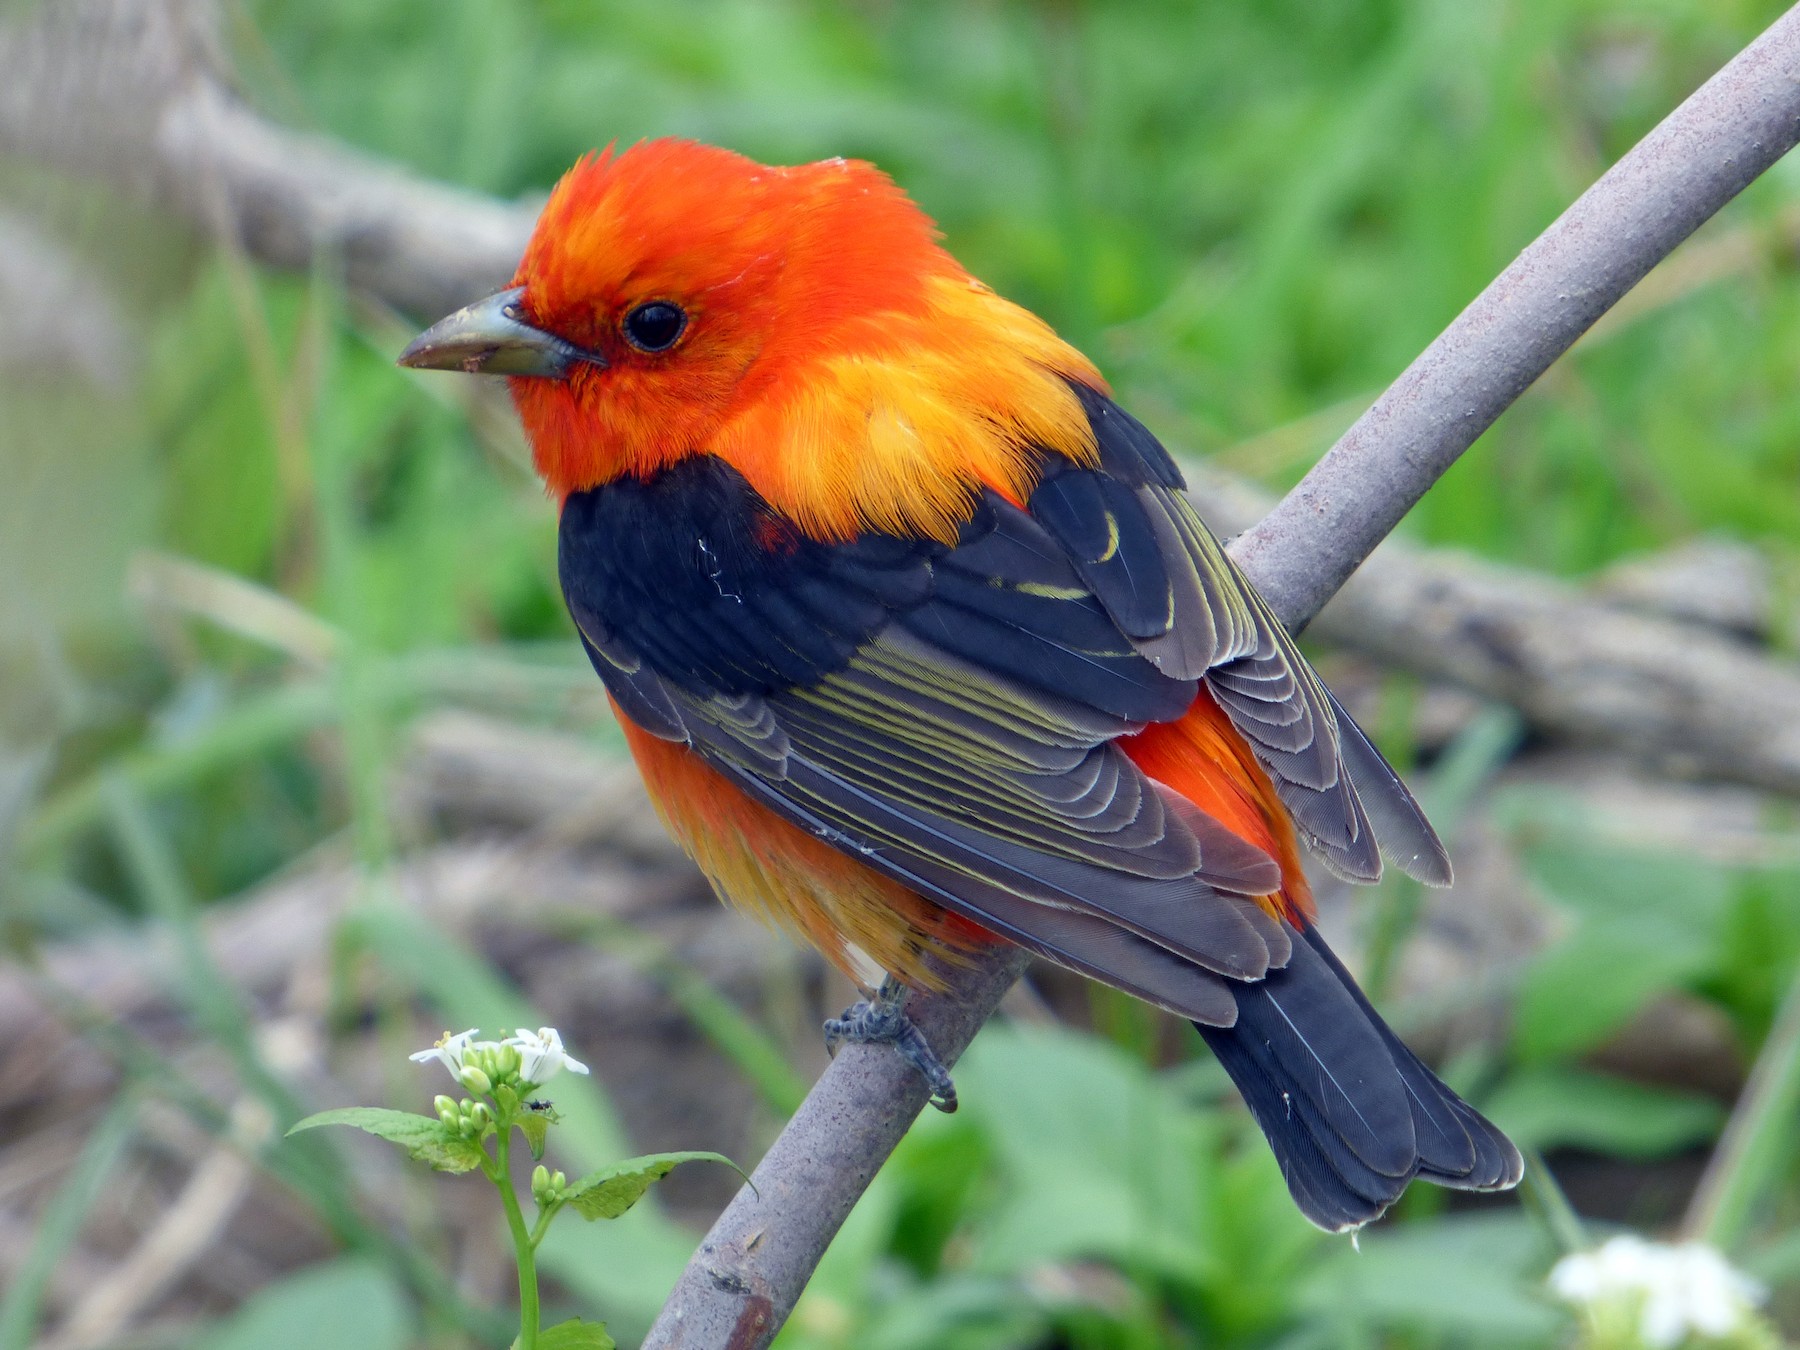 Black Birds with Red Wings - Scarlet tanager